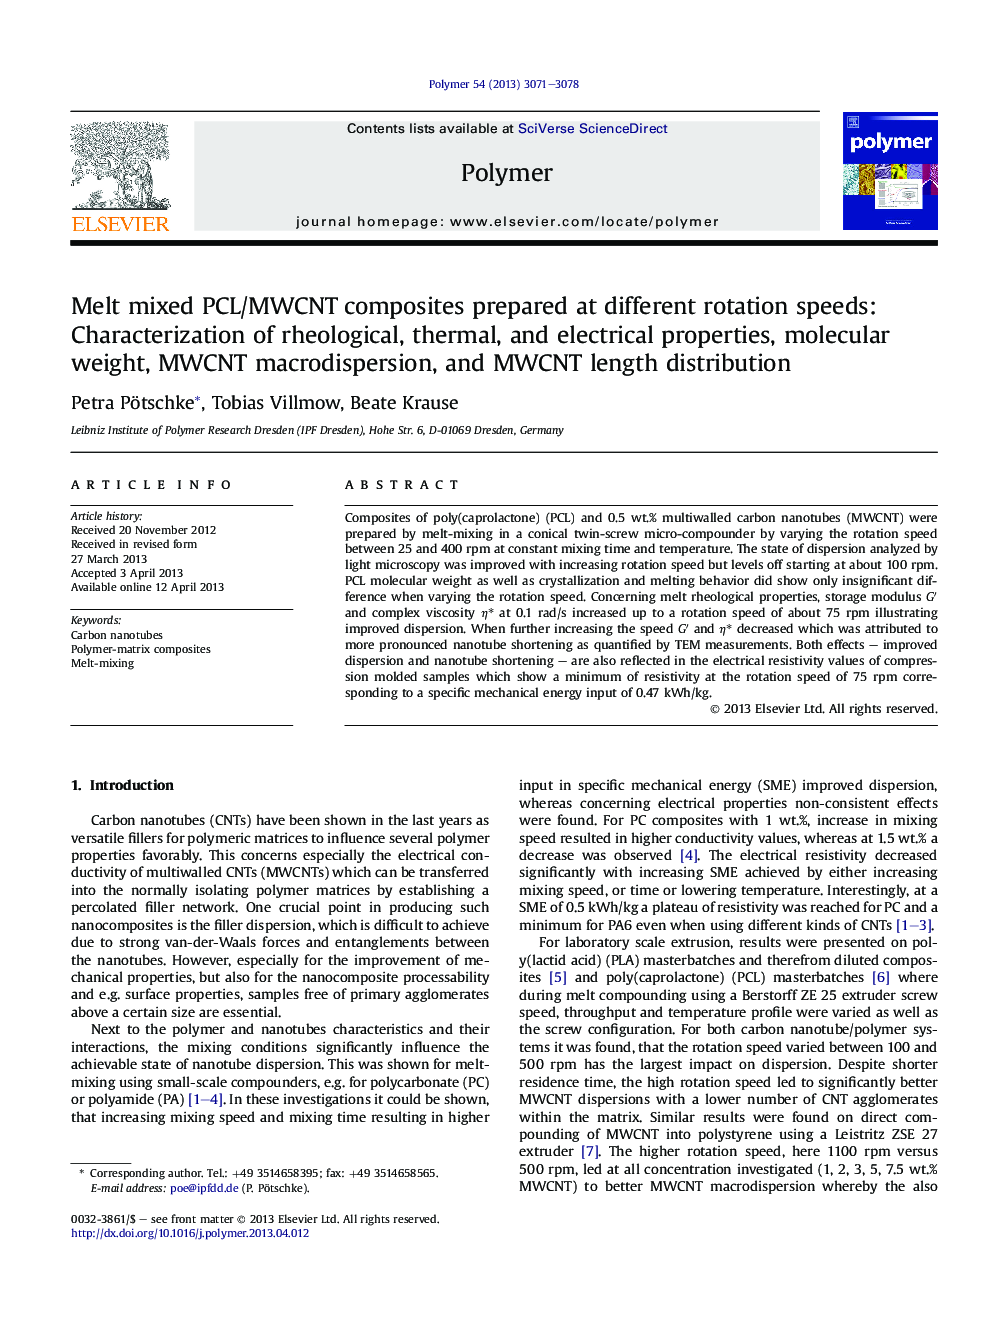 Melt mixed PCL/MWCNT composites prepared at different rotation speeds: Characterization of rheological, thermal, and electrical properties, molecular weight, MWCNT macrodispersion, and MWCNT length distribution